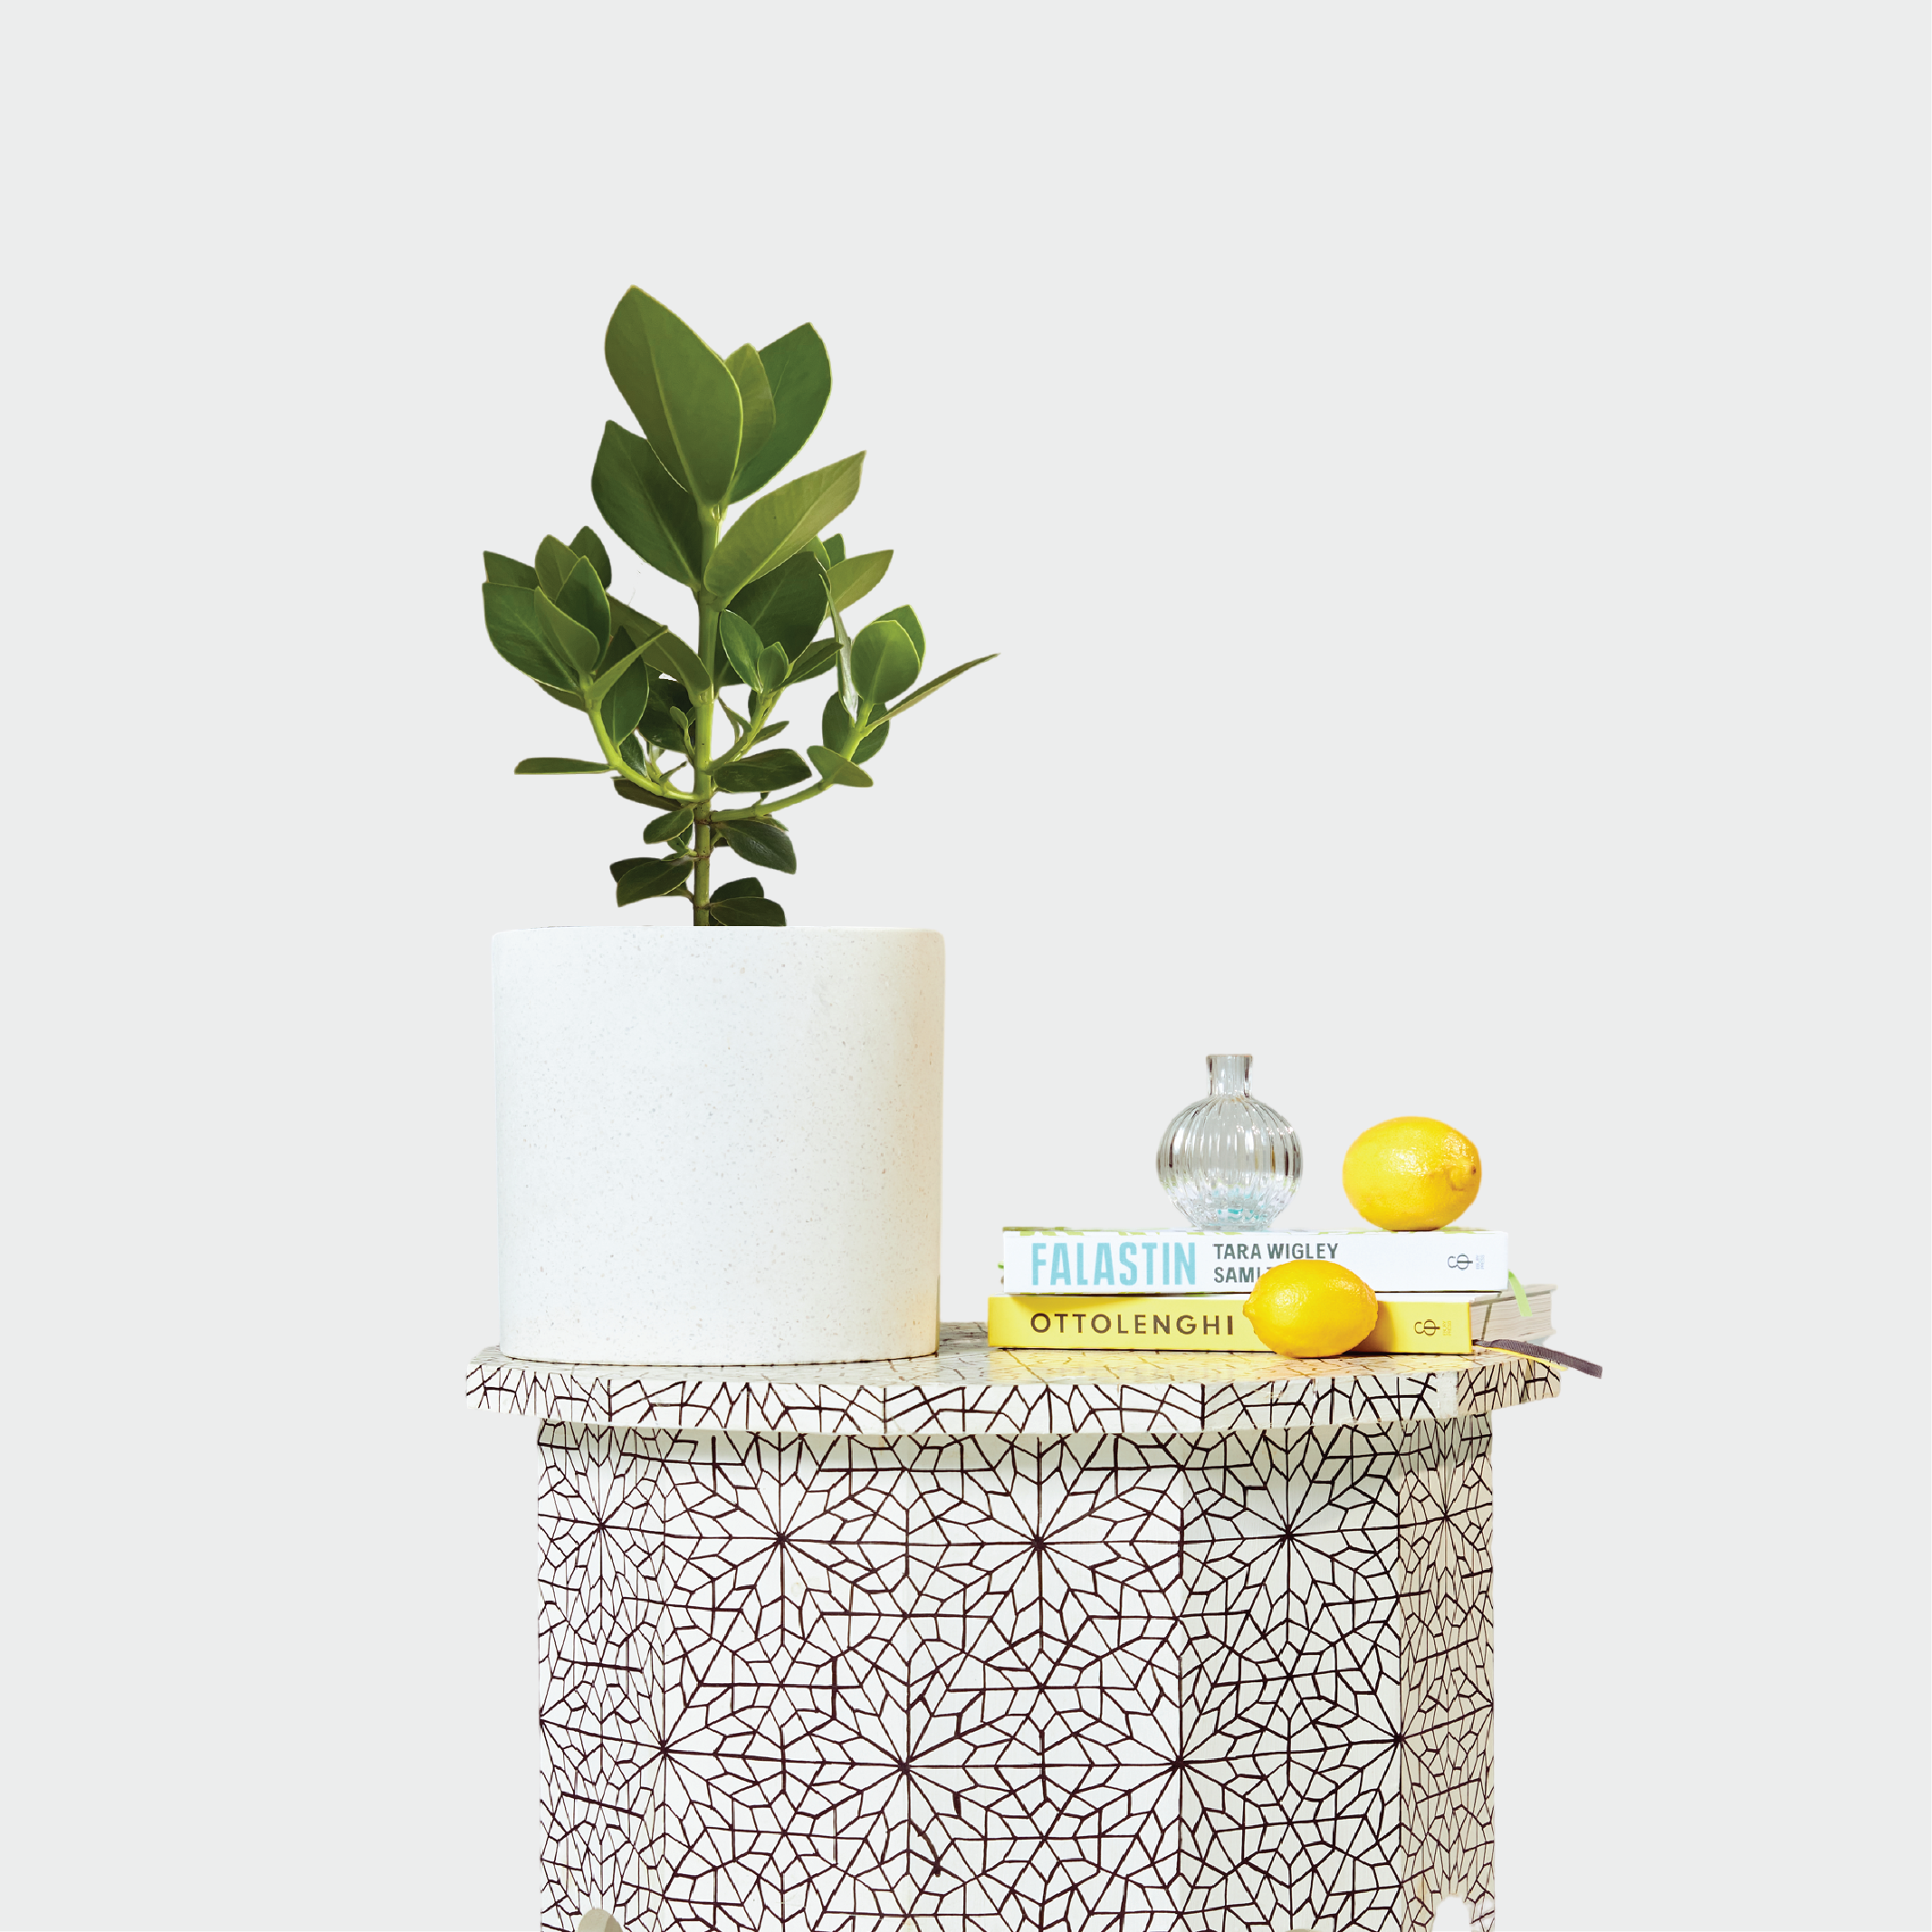 Autograph Tree in Jardin Terrazzo Pot White on Morocco Table with accessories at The Good Plant Co